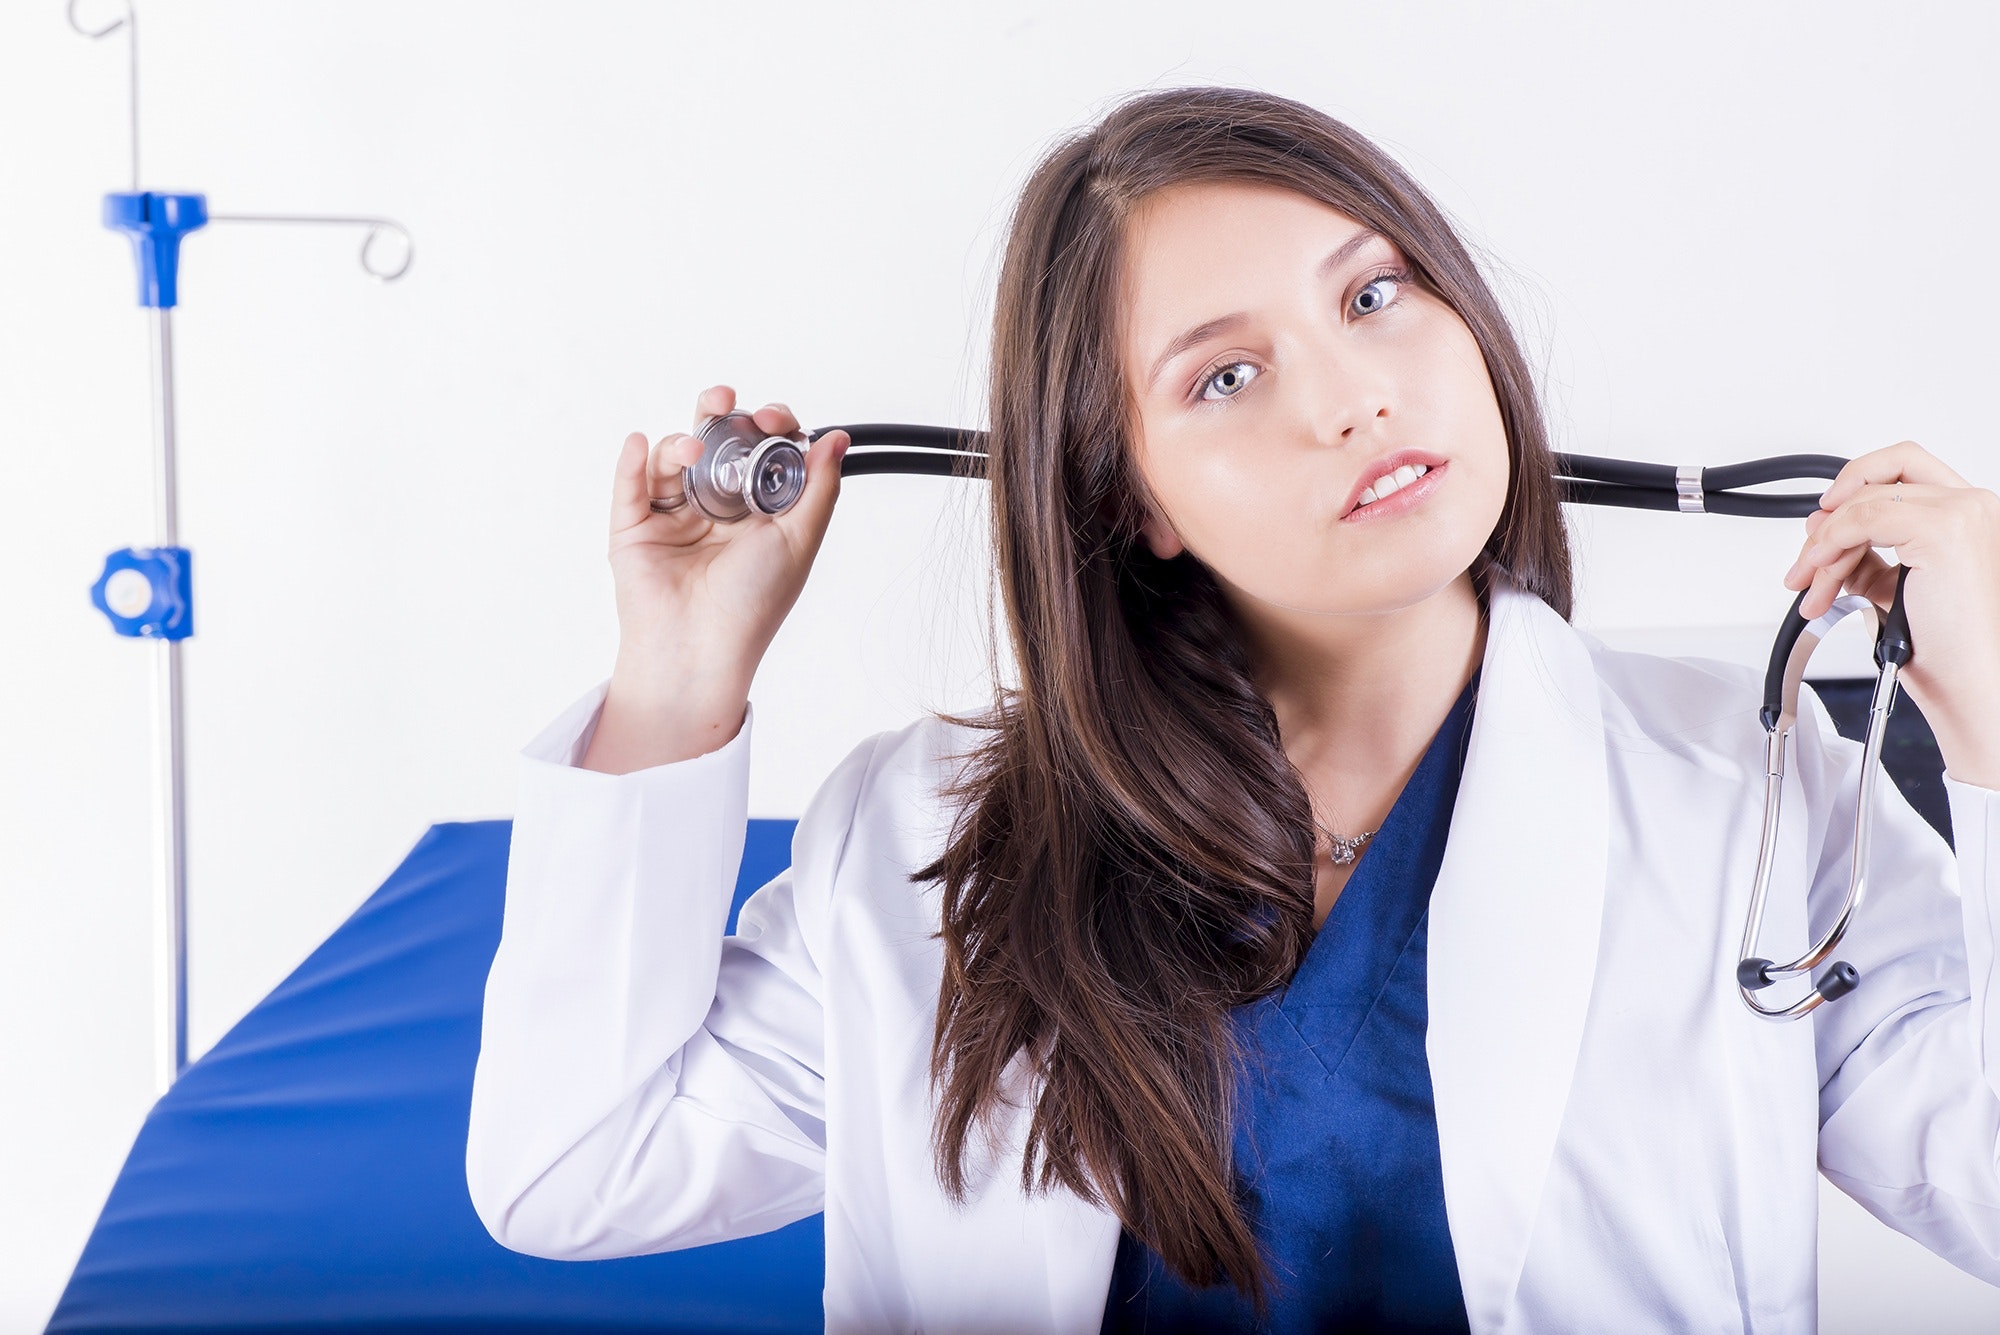 A doctor prepares her stethoscope to examine a patient